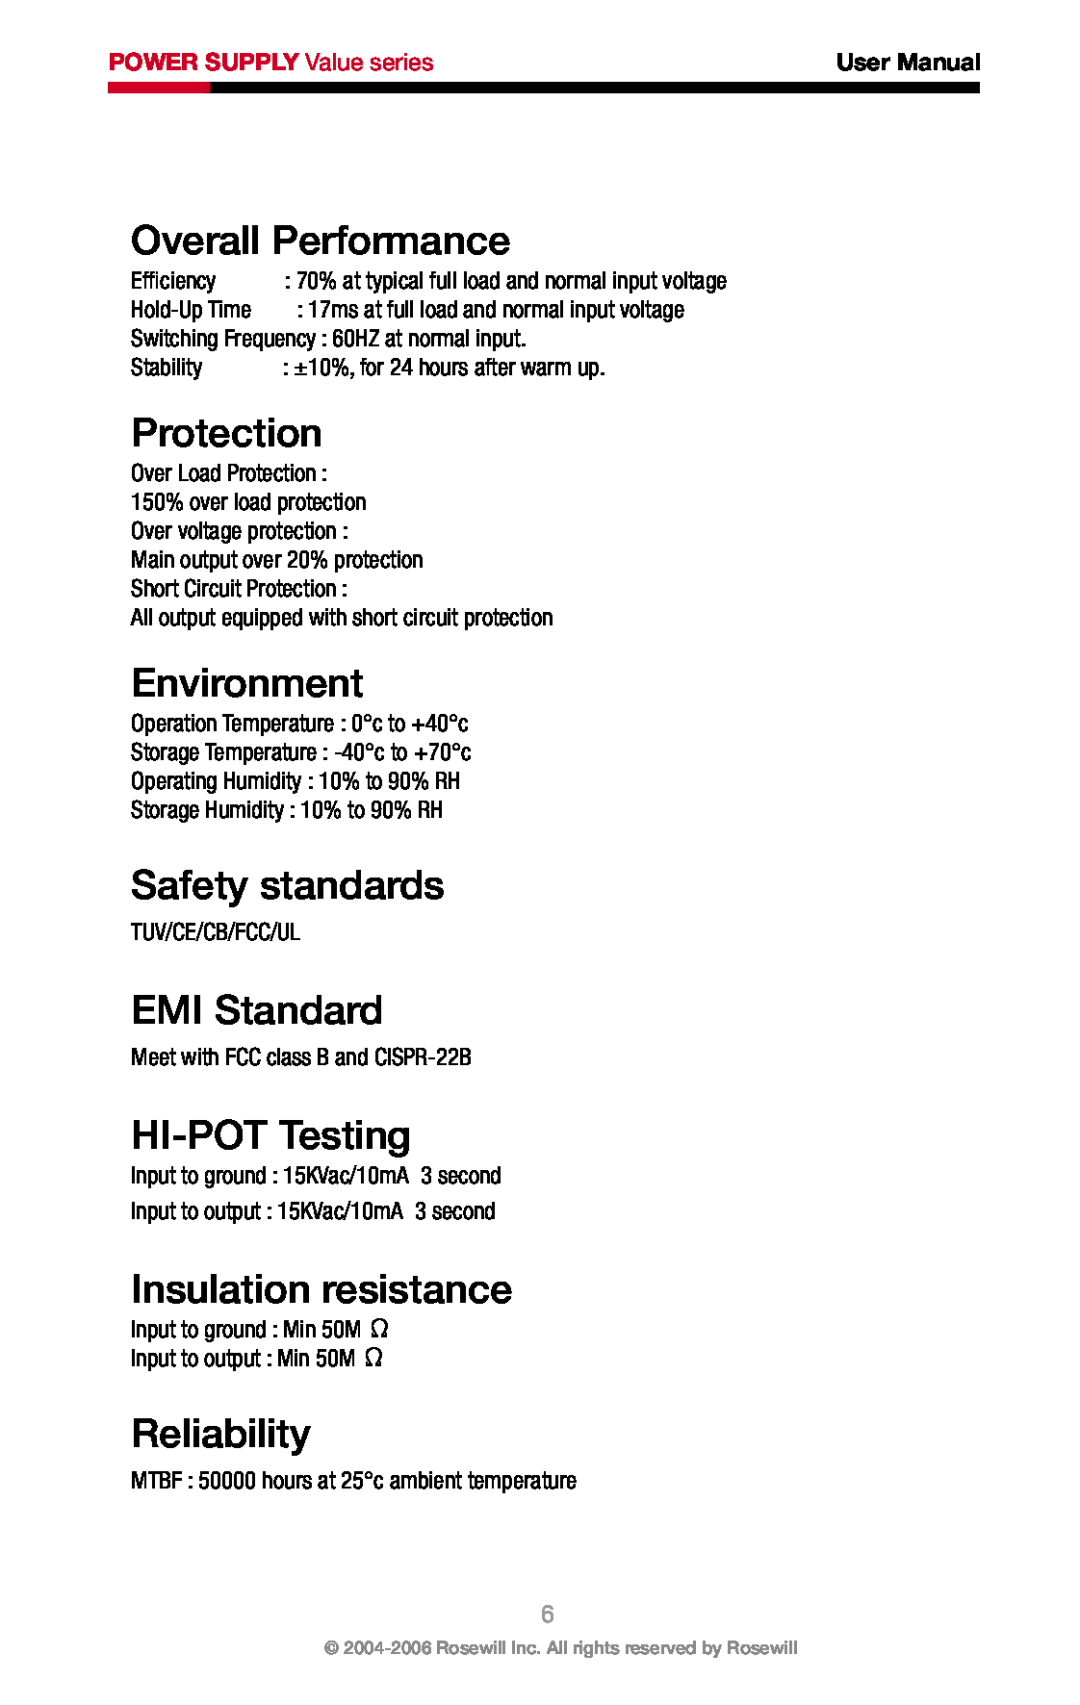 Rosewill RV-380-2-FRB Overall Performance, Protection, Environment, Safety standards, EMI Standard, HI-POT Testing 